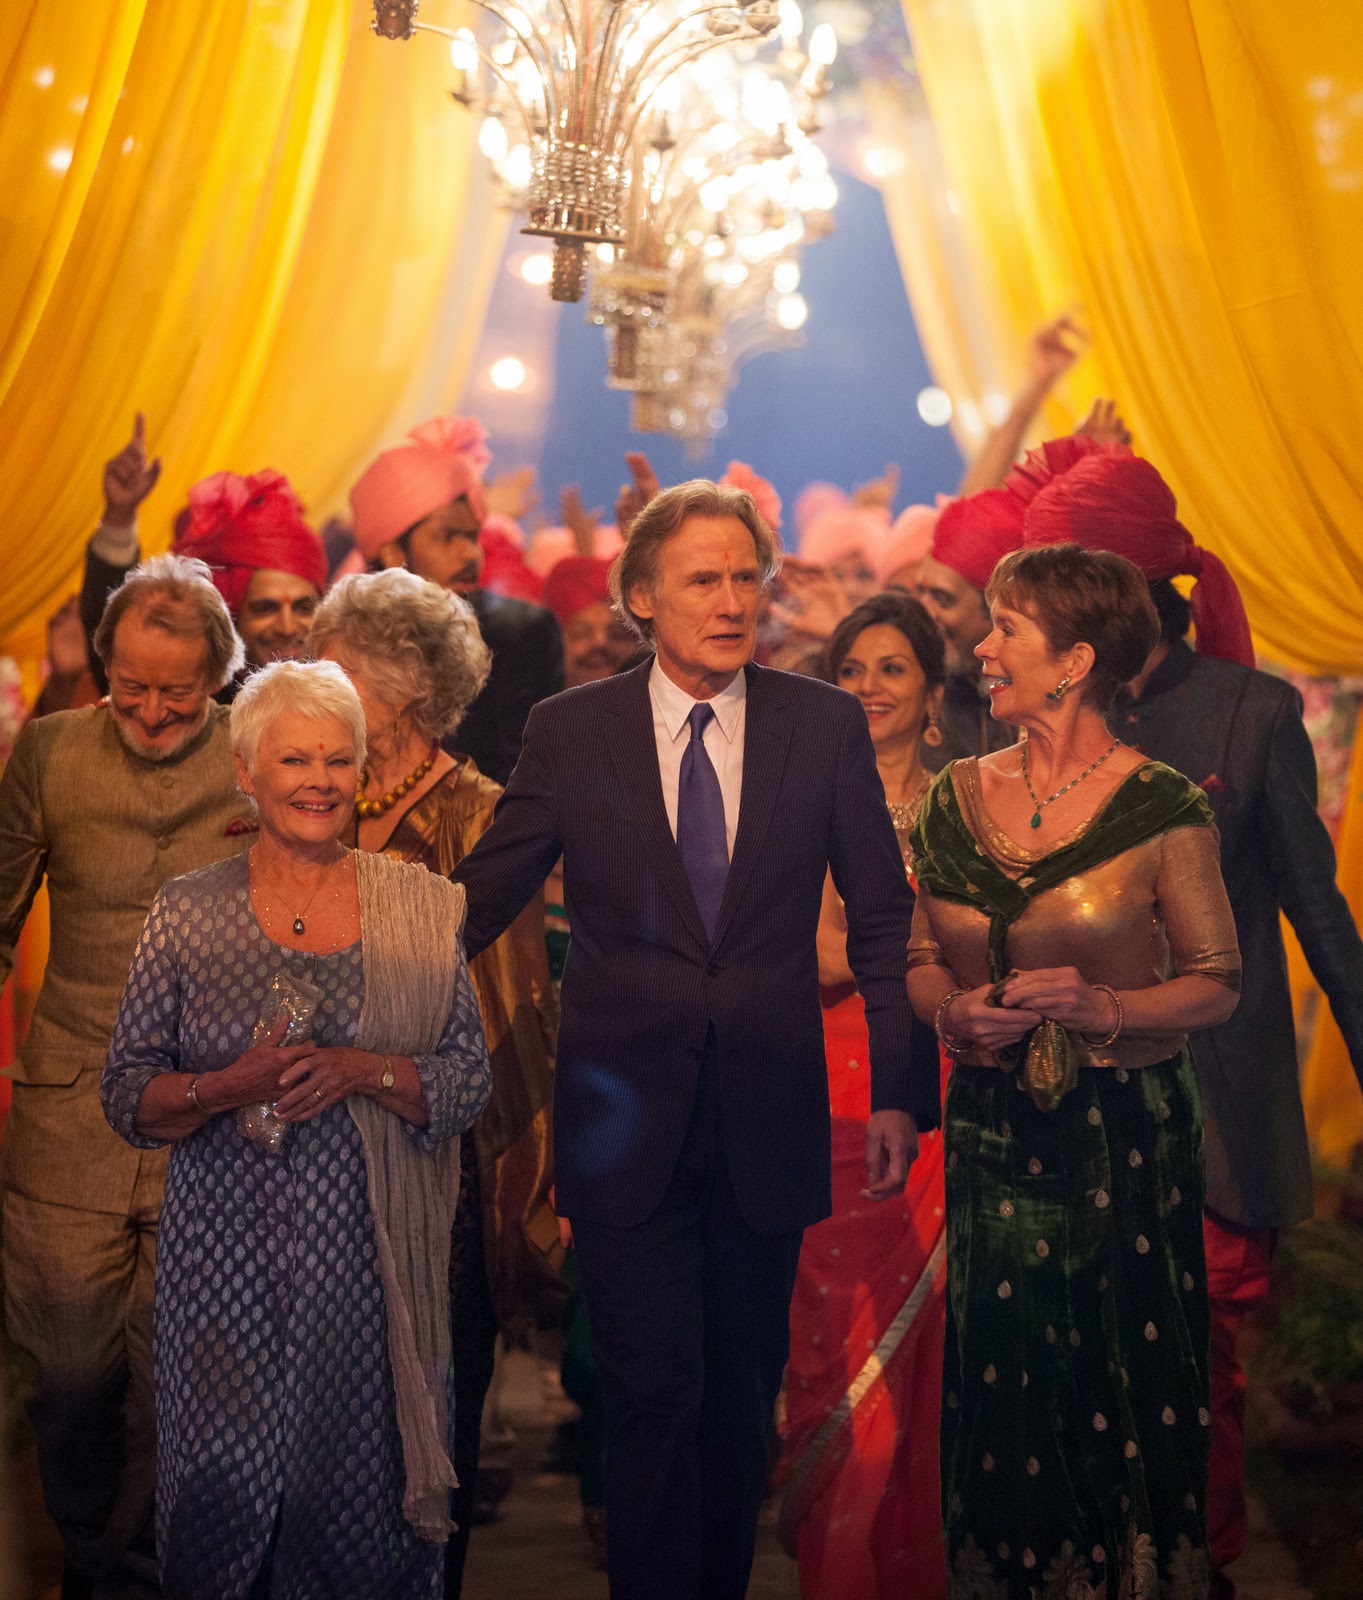 The Second Best Exotic Marigold Hotel #15